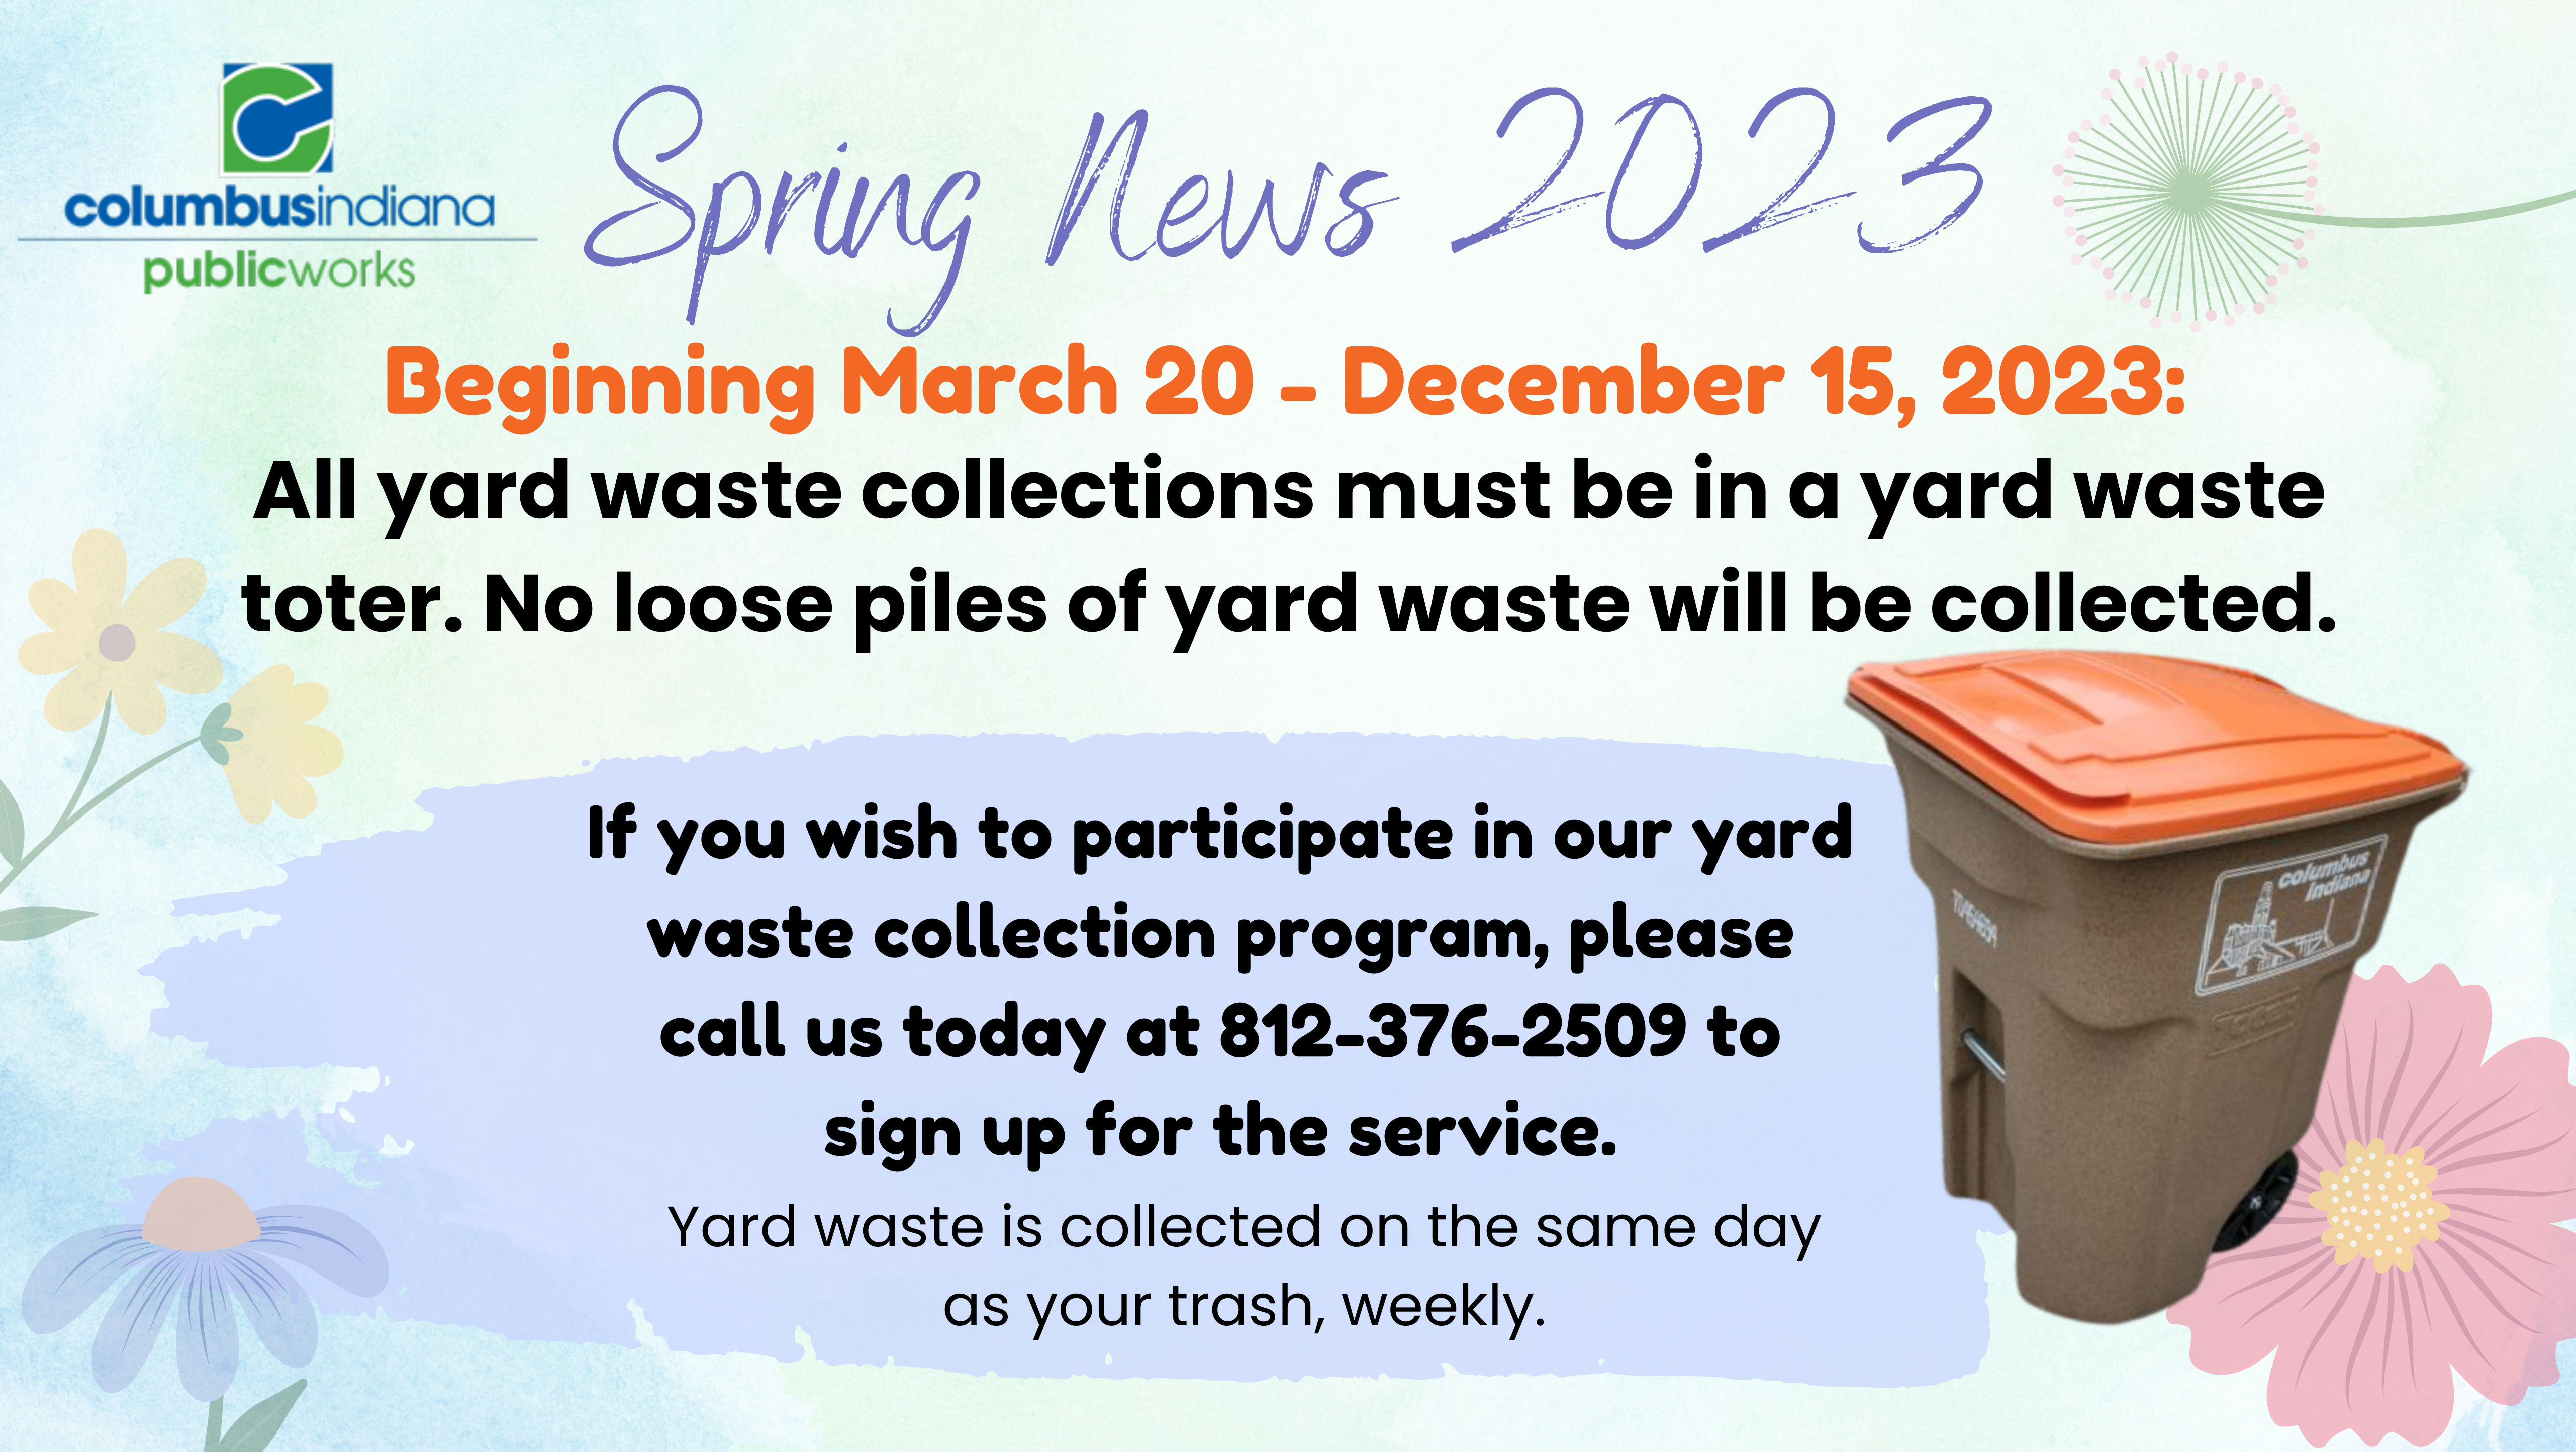 Spring news flyer depicting yard waste rules for 2023